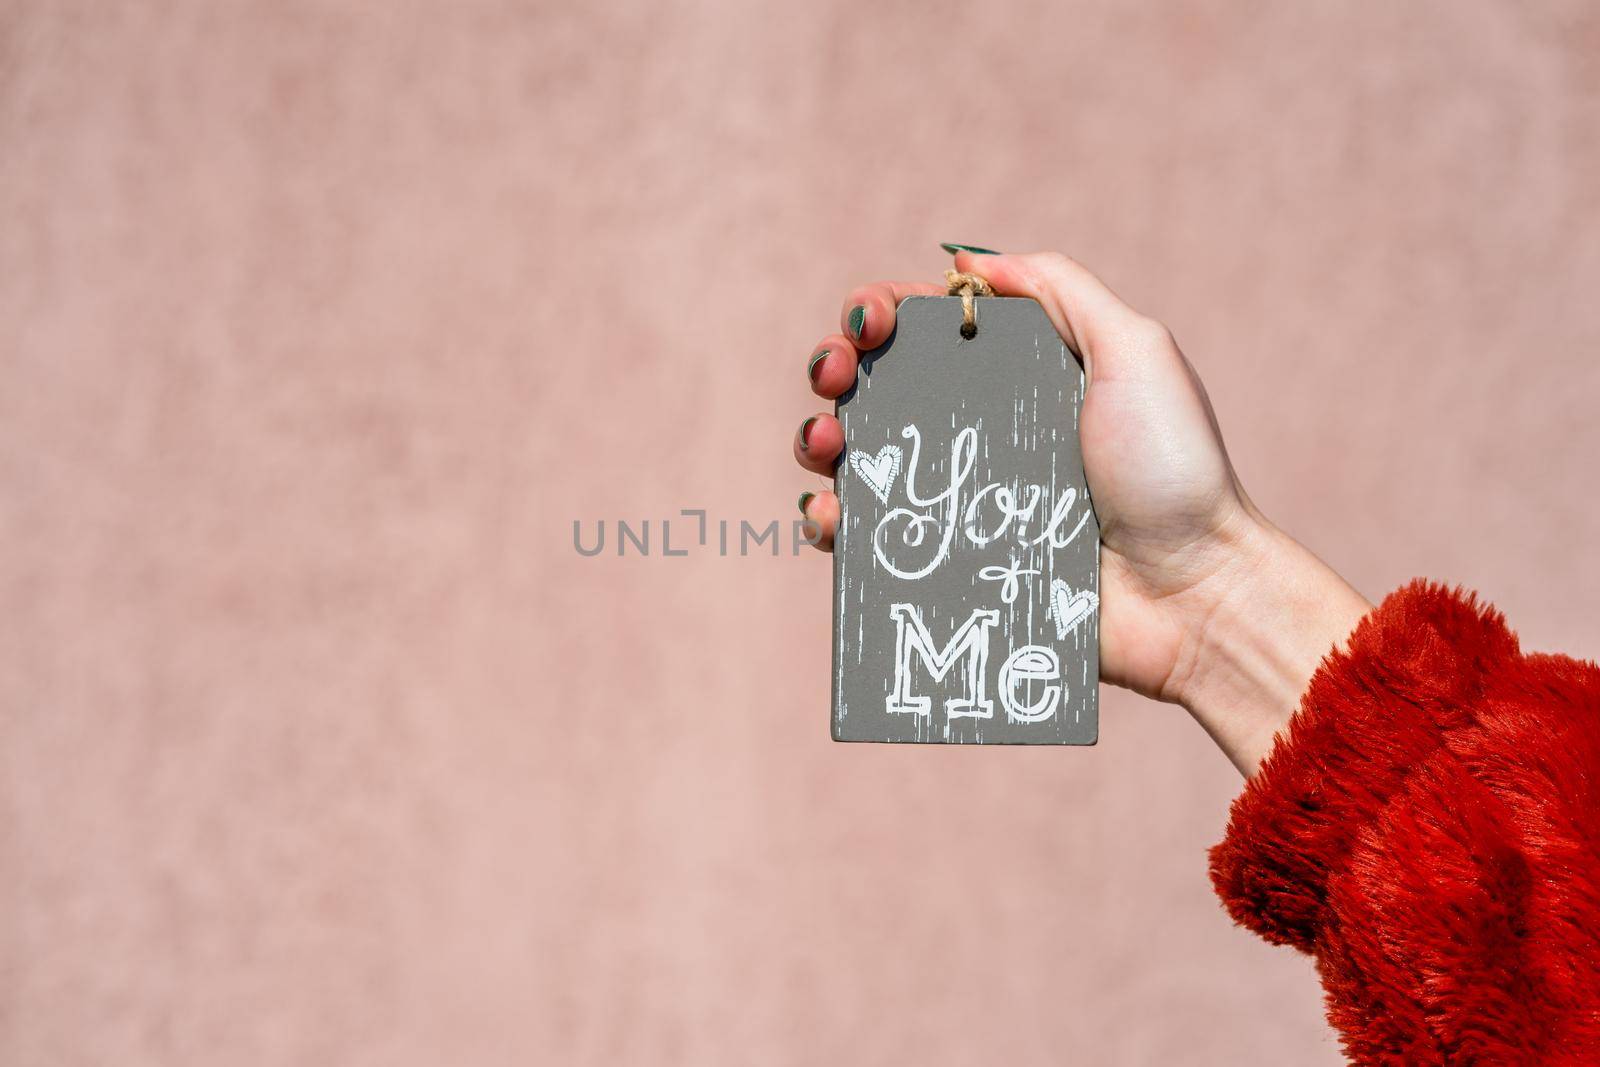 Hands holding ornament with text message you and me